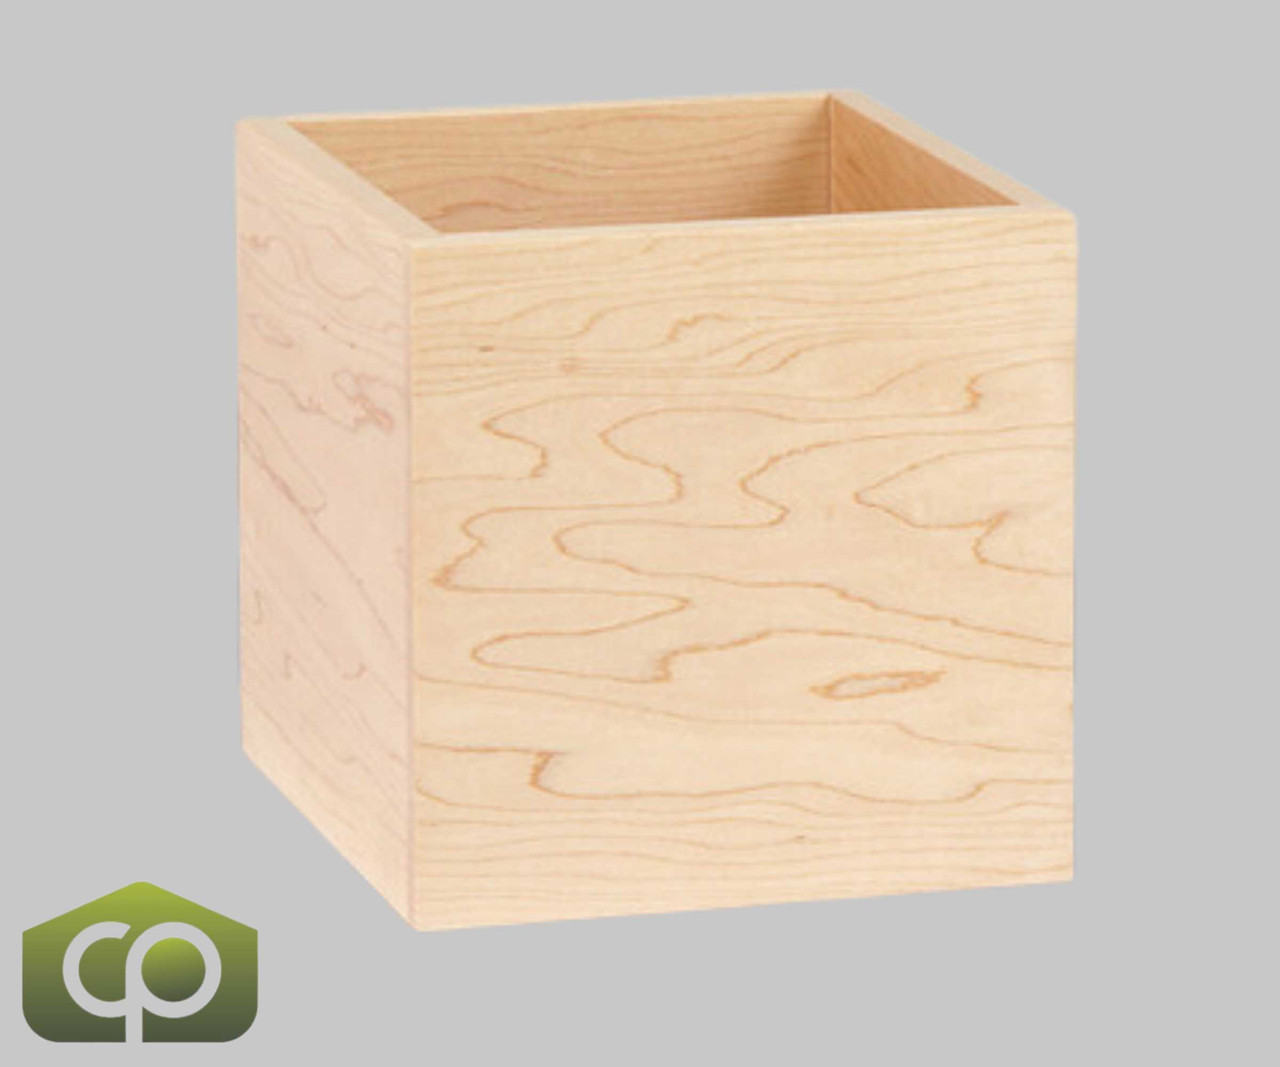 Cal-Mil Blonde 6" x 6" x 6" Maple Wood Merchandiser Box | Minimalistic Display for Snacks and Produce